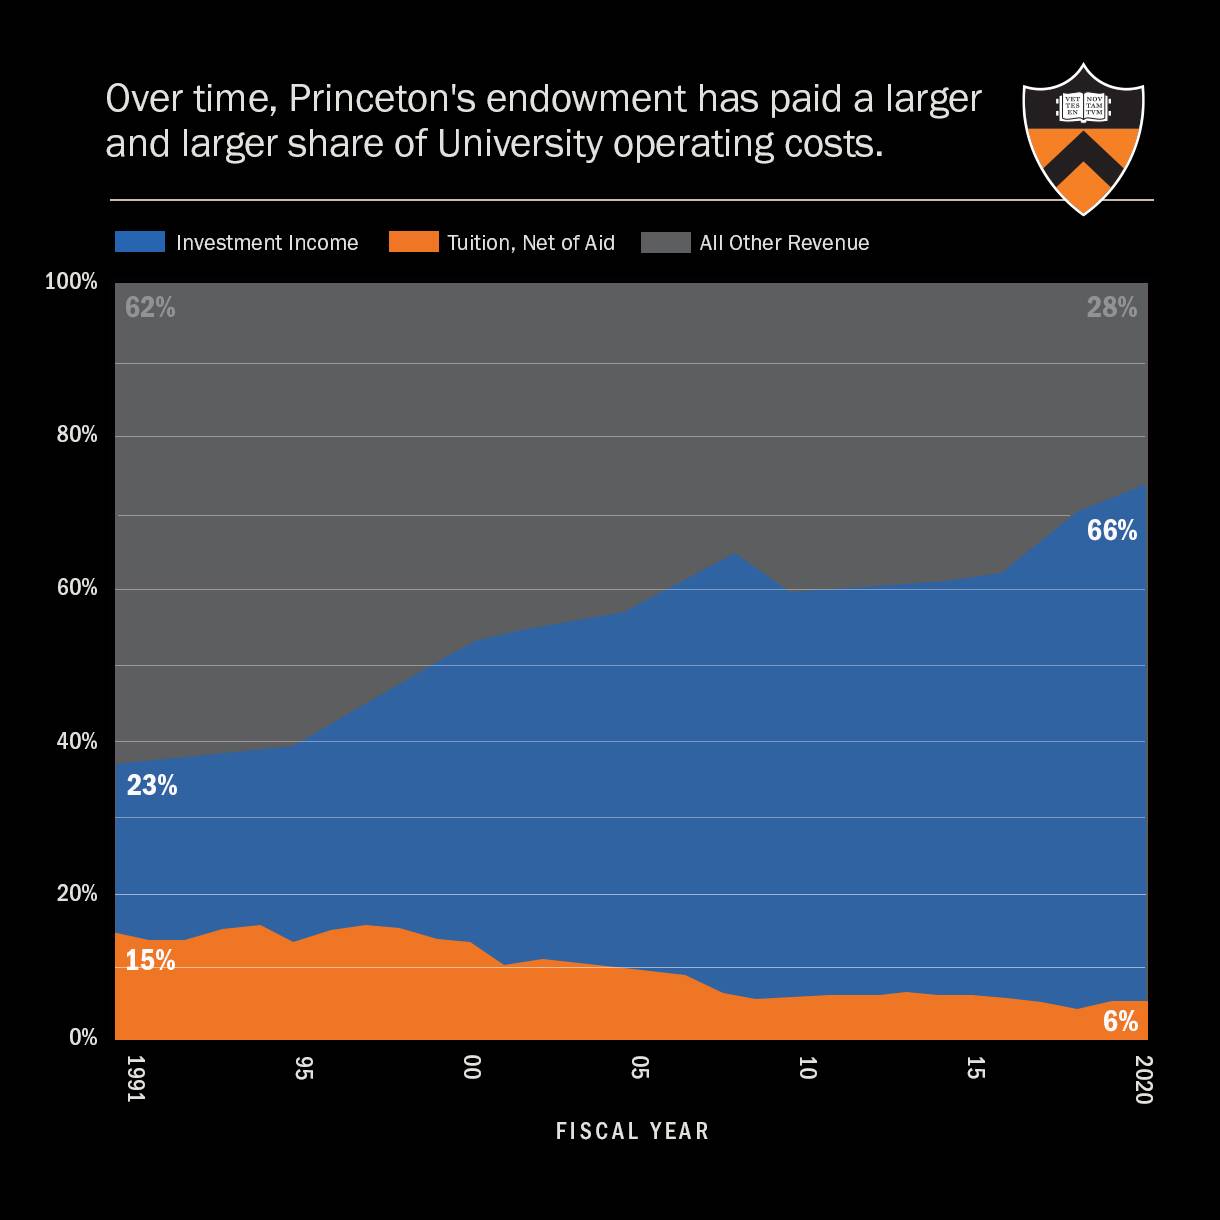 Over time, Princeton's endowment has paid a larger and larger share of University operating costs. 